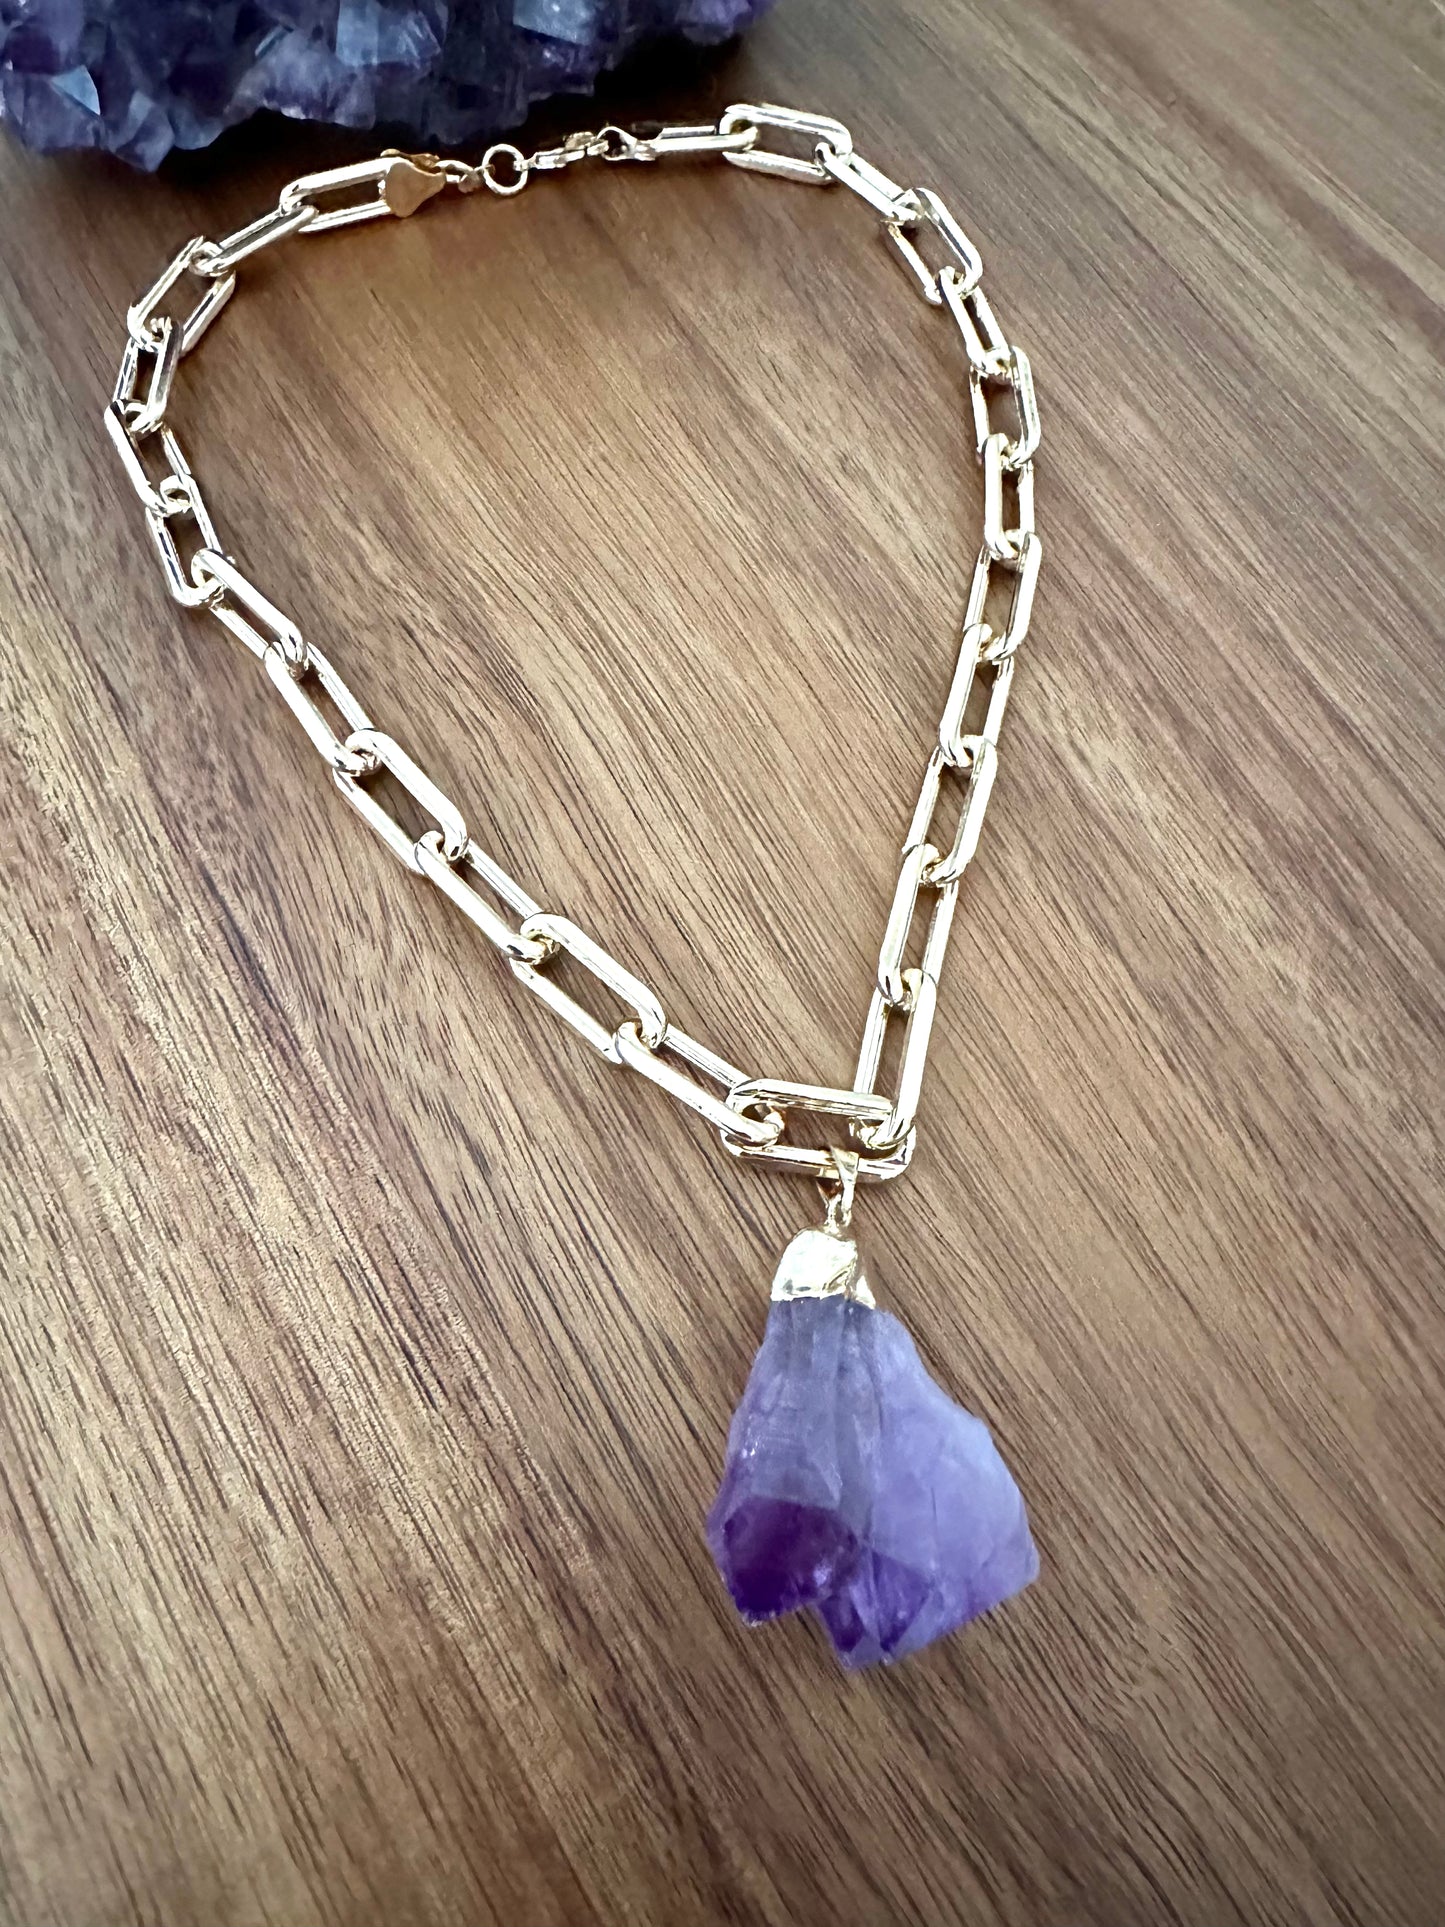  a large double pointed amethyst purple crystal pendant on a large gold chain on a wooden background. a large amethyst crystal sits at the top of the image